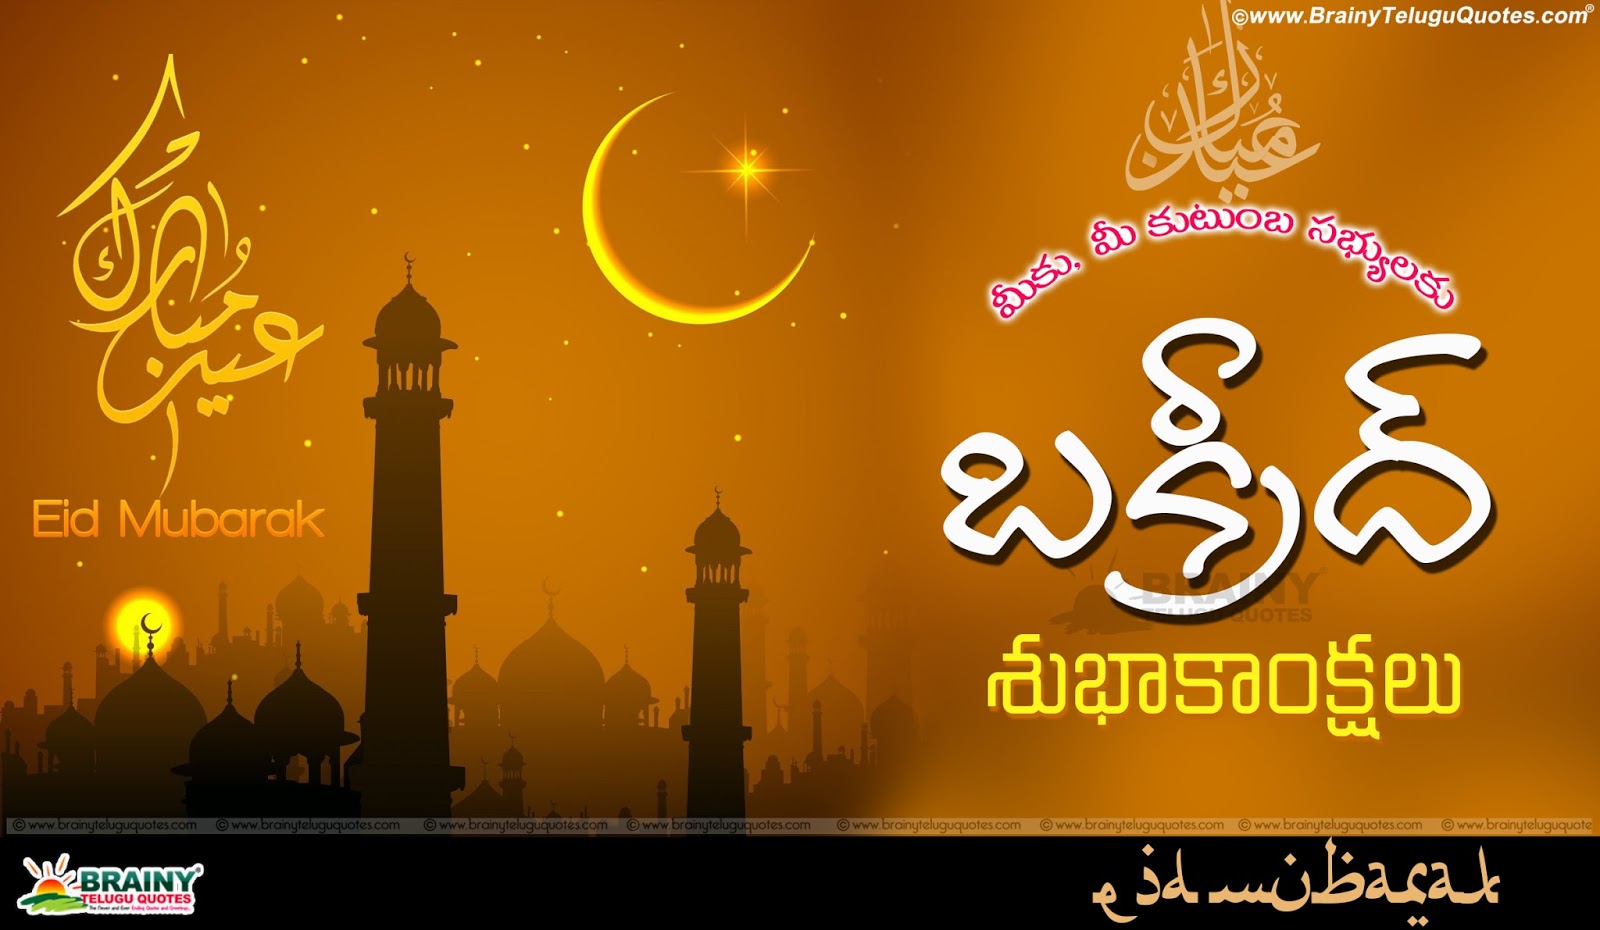 Happy Bakrid Wishes and Quotes Images Eid-Ul-Adha Hd 